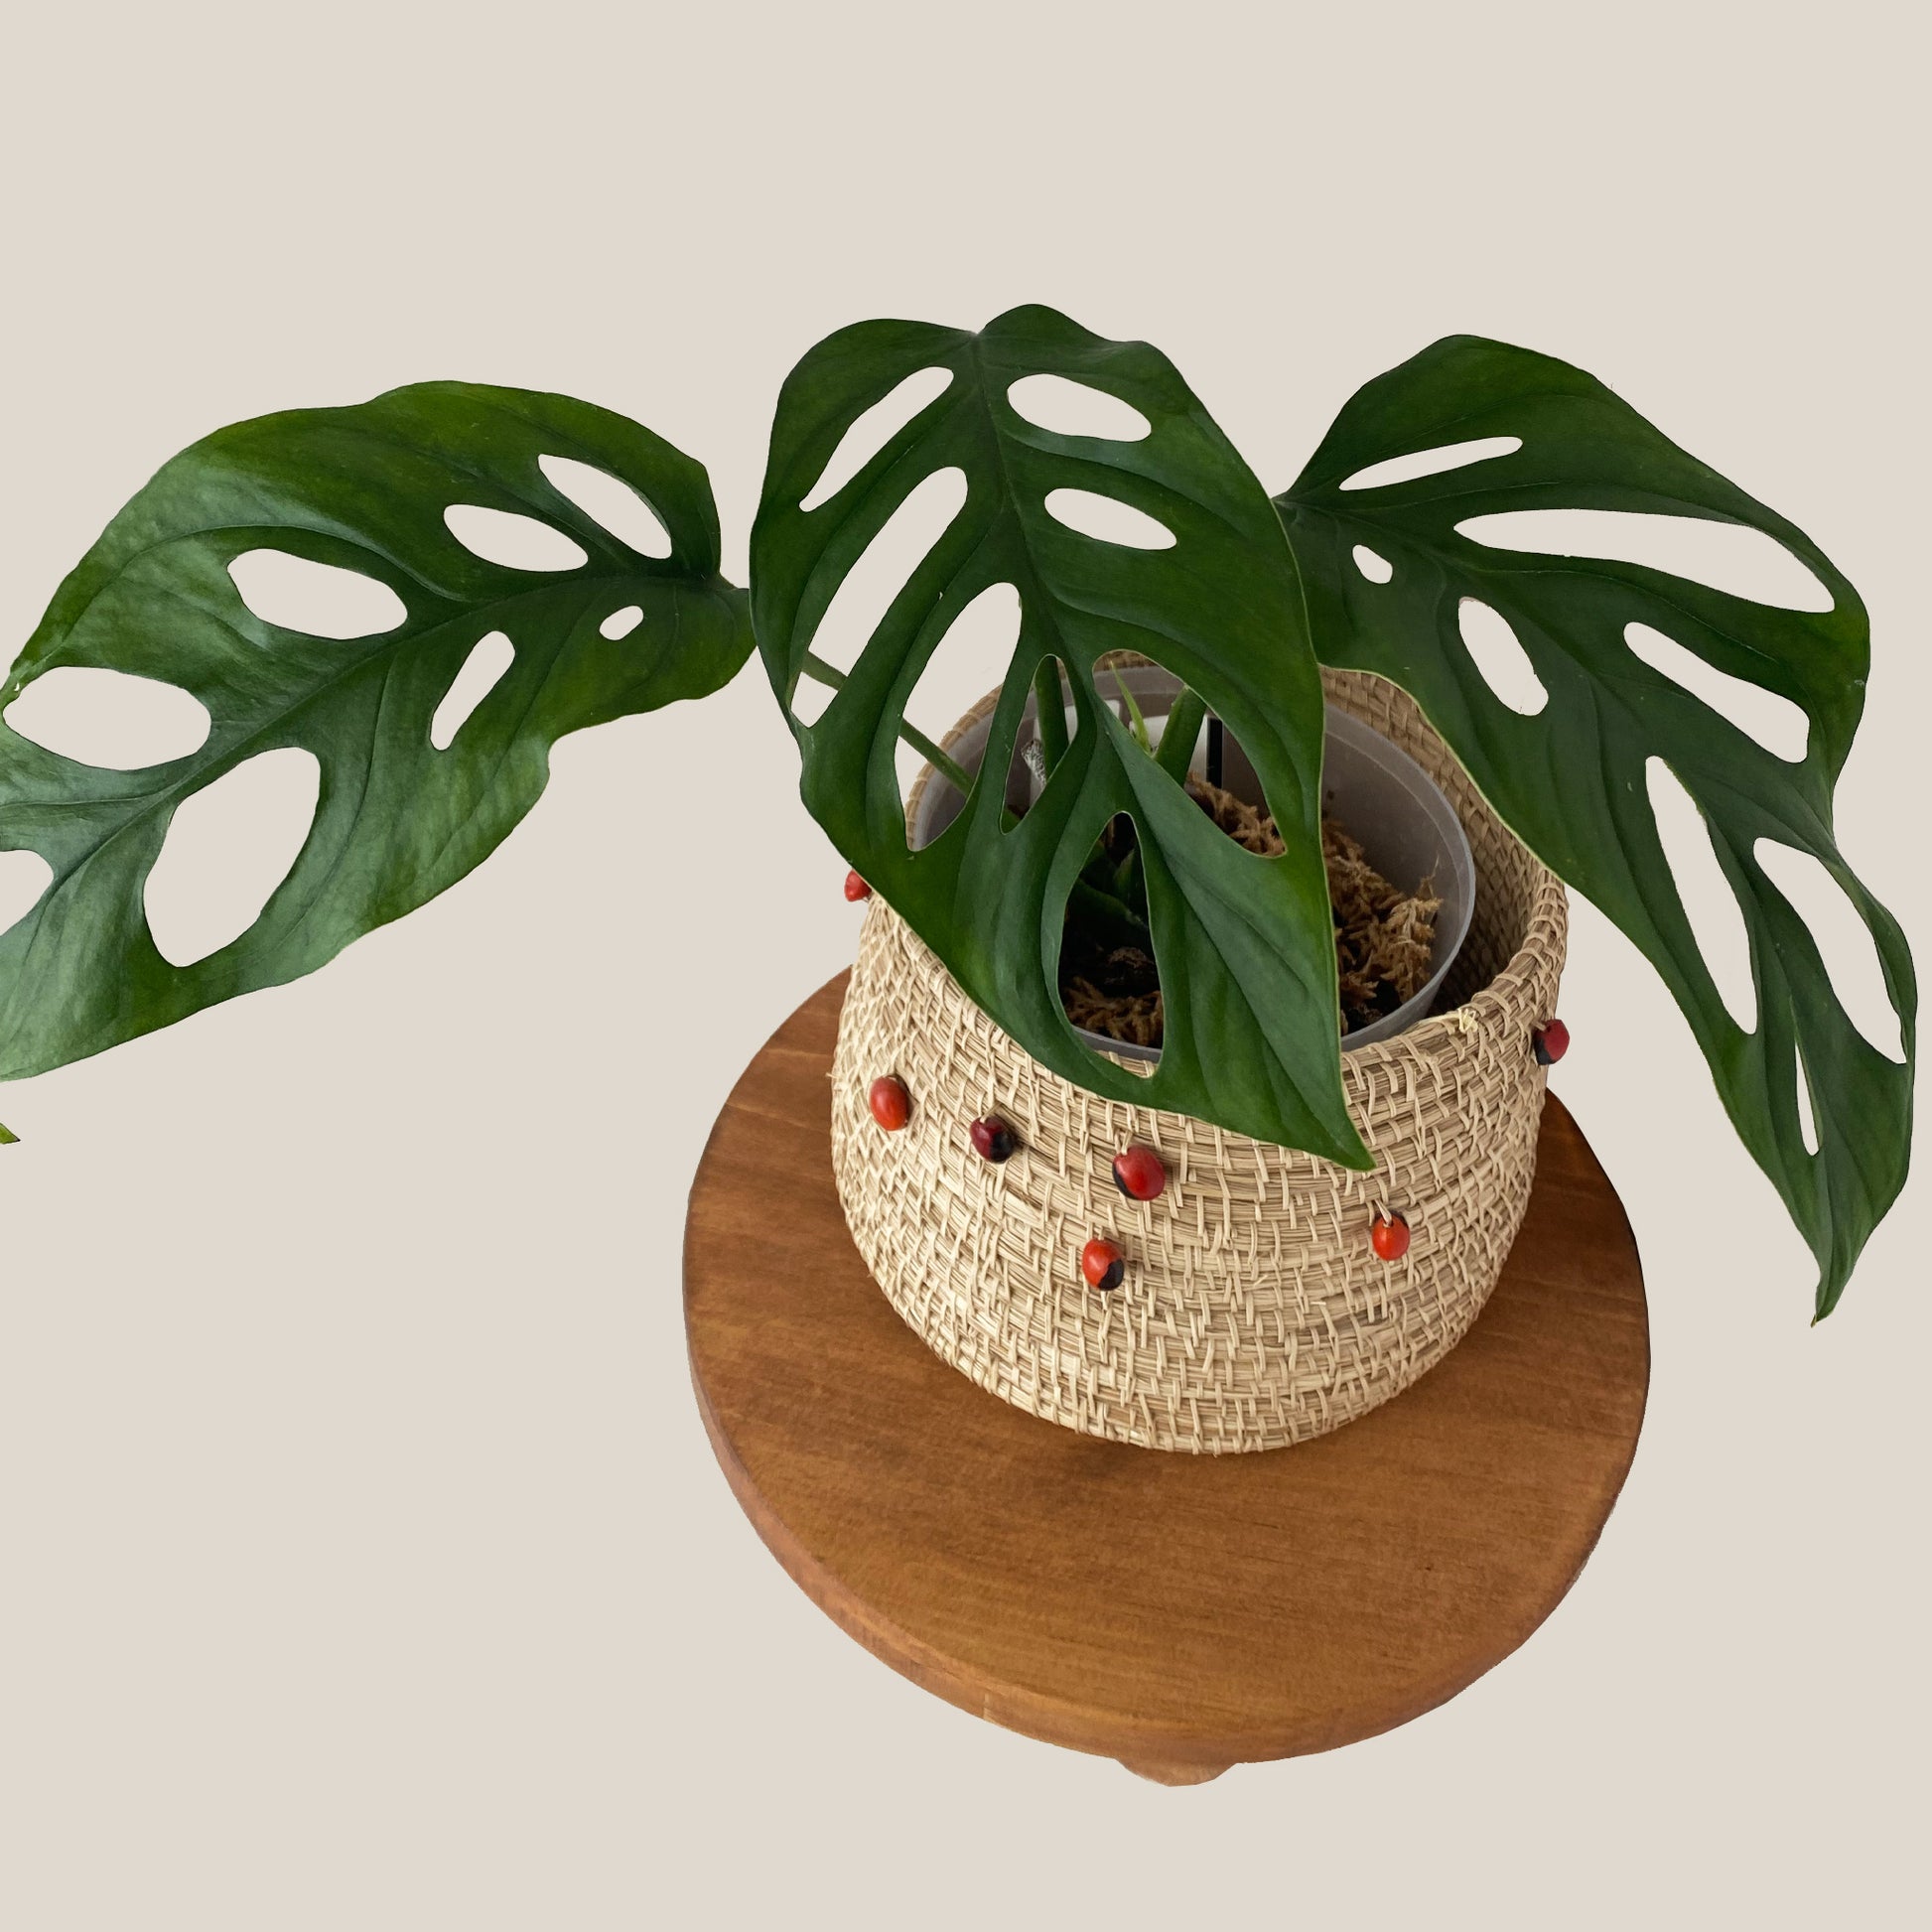 Monstera Lechleriana in Small Size, available in Ontario